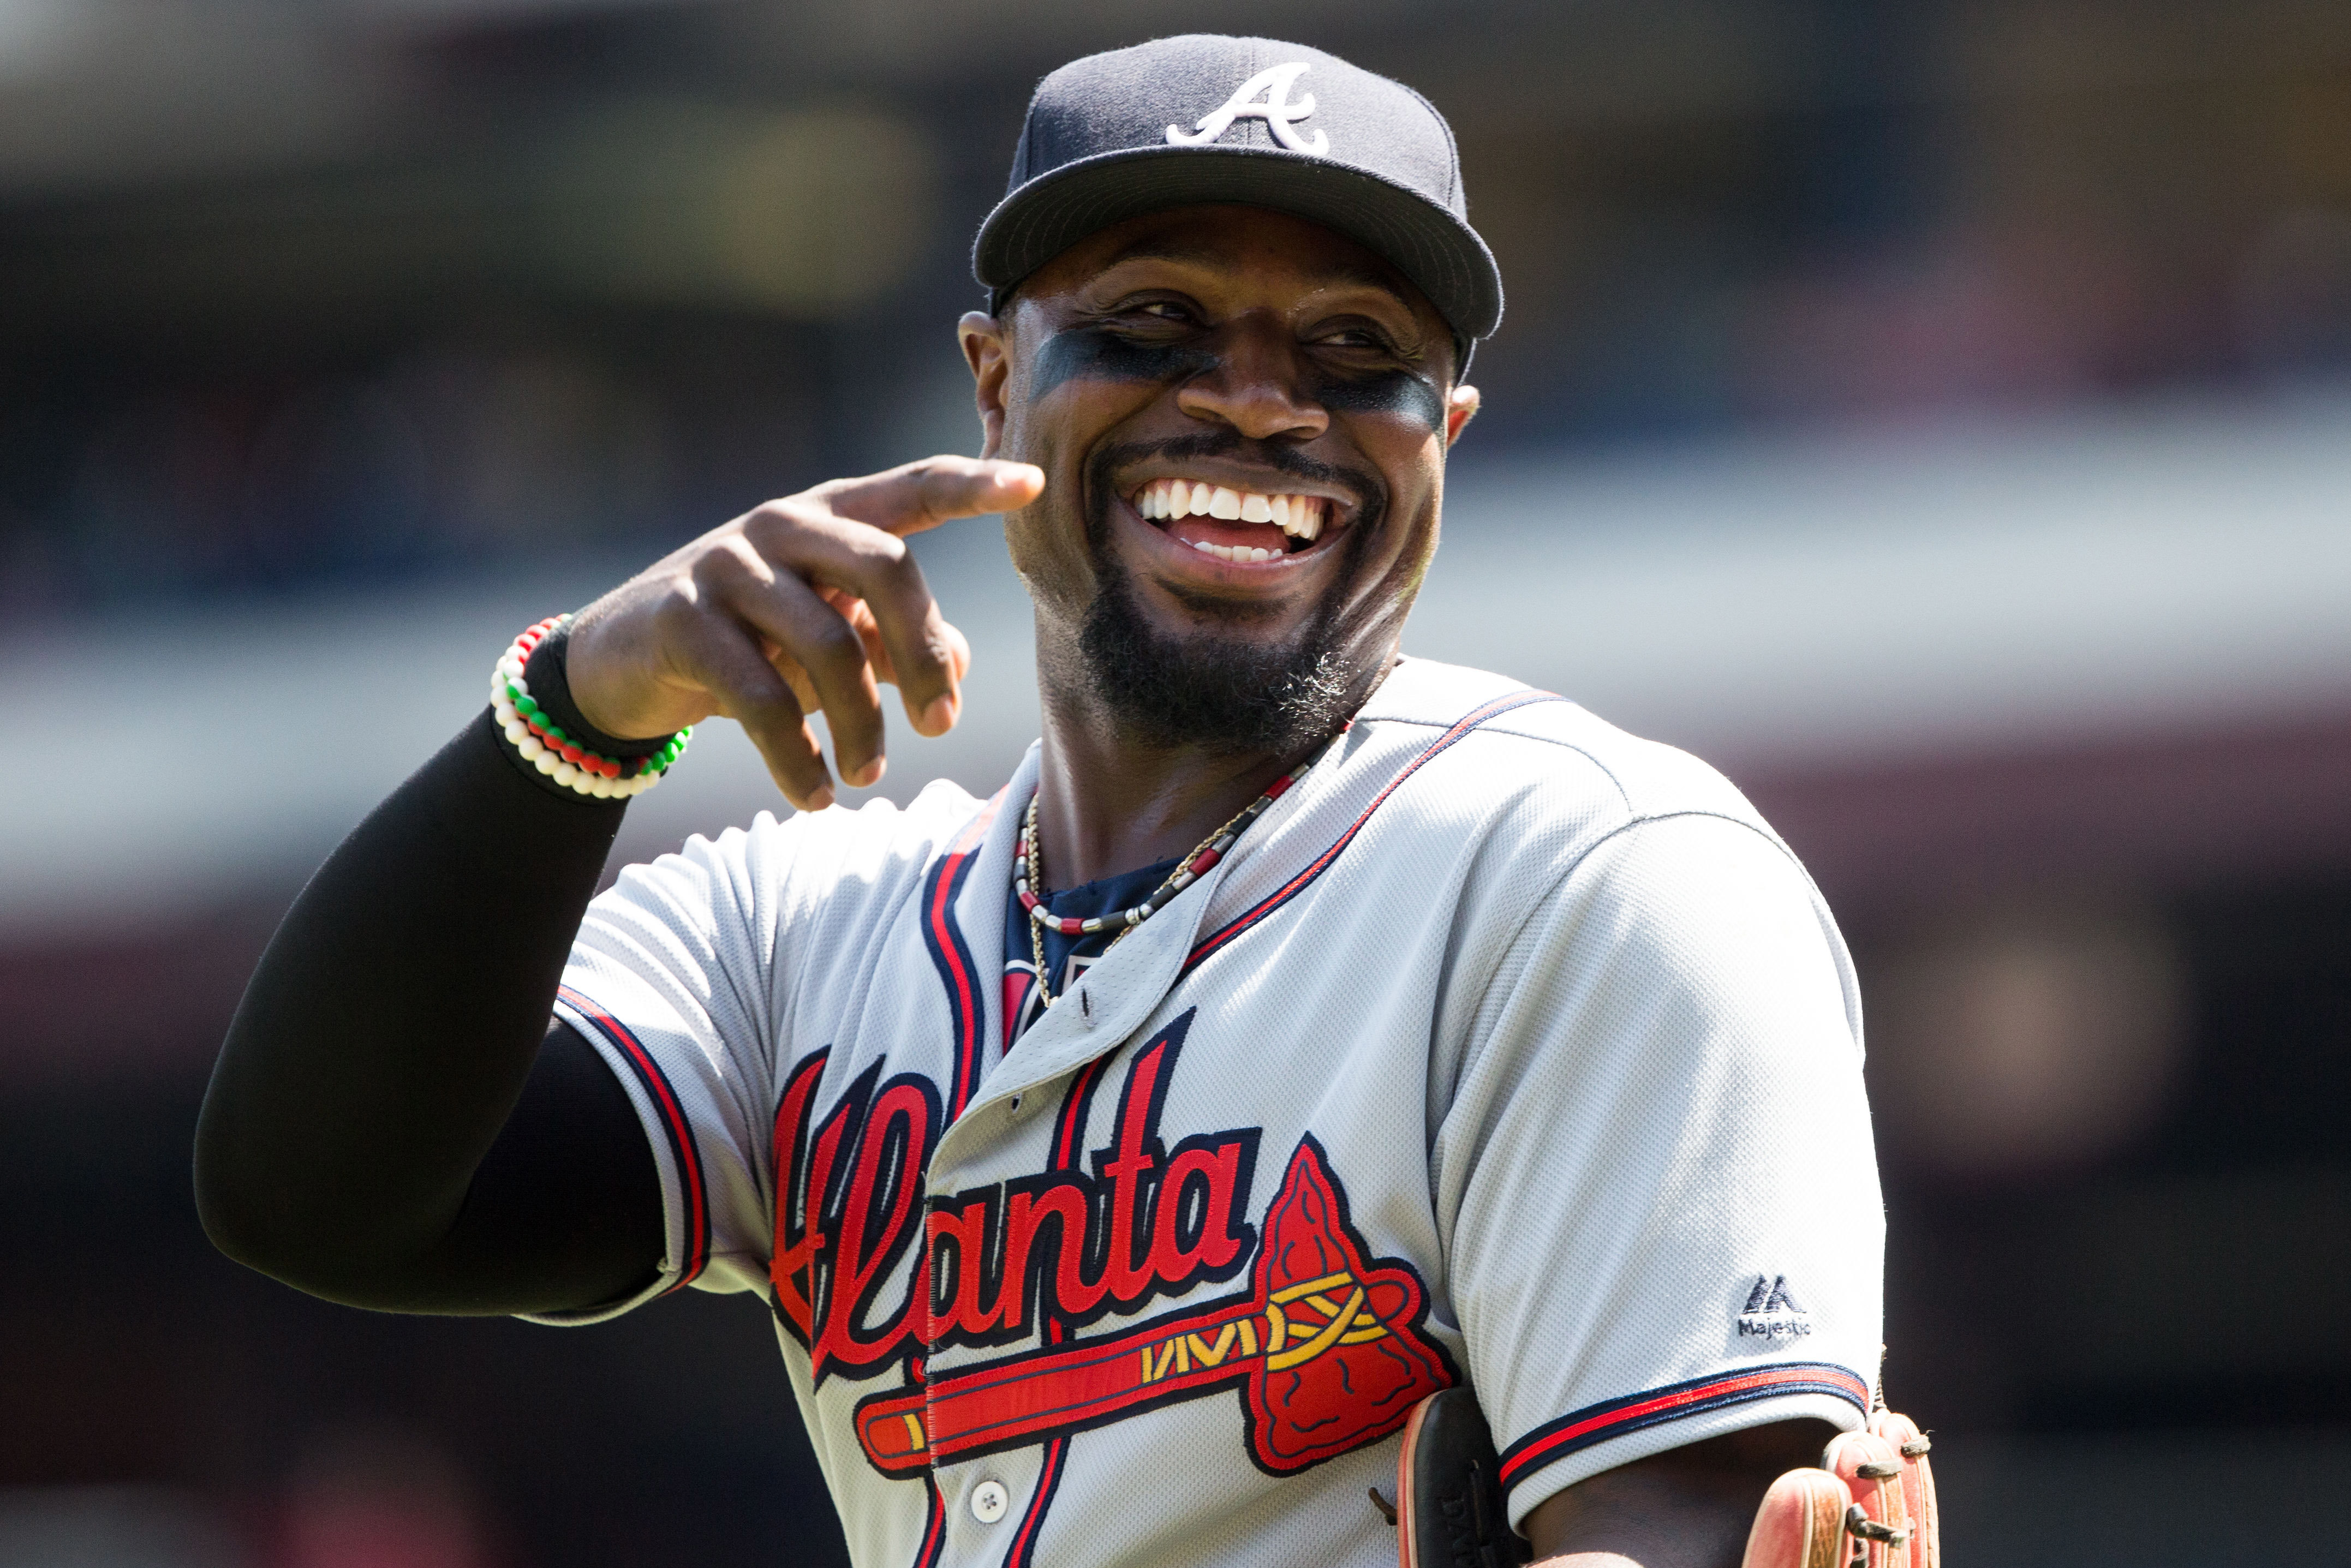 Atlanta Braves on X: Friendly reminder from @DatDudeBP that these